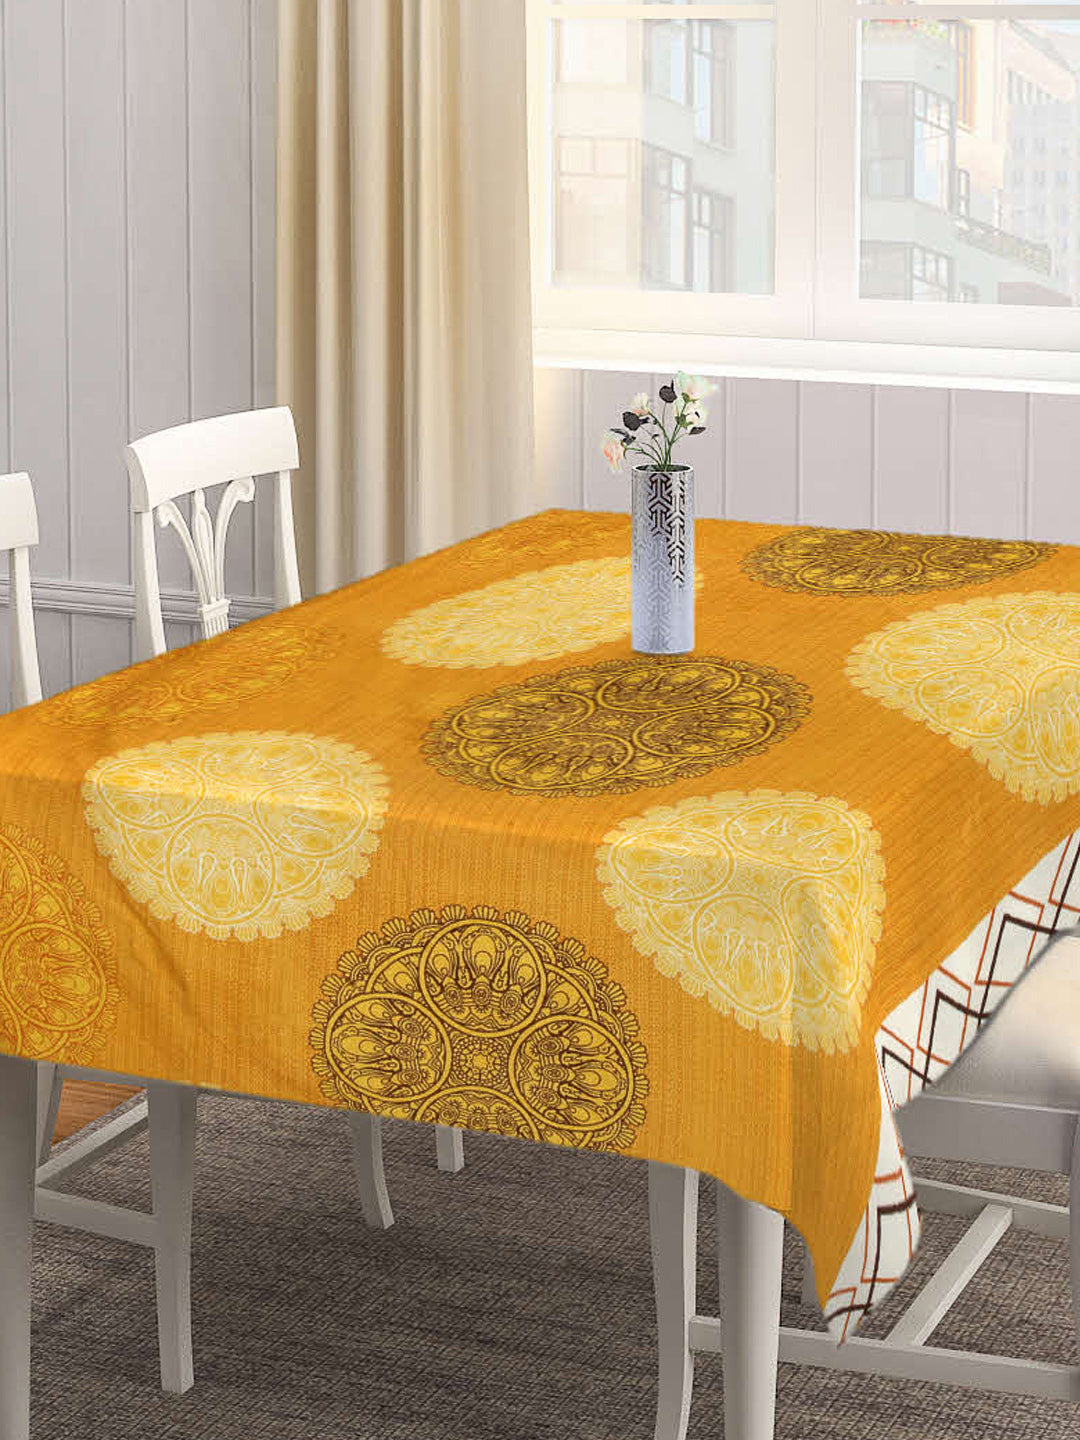 Arrabi Yellow Indian Cotton Blend 6 SEATER Table Cover (180 X 130 cm)